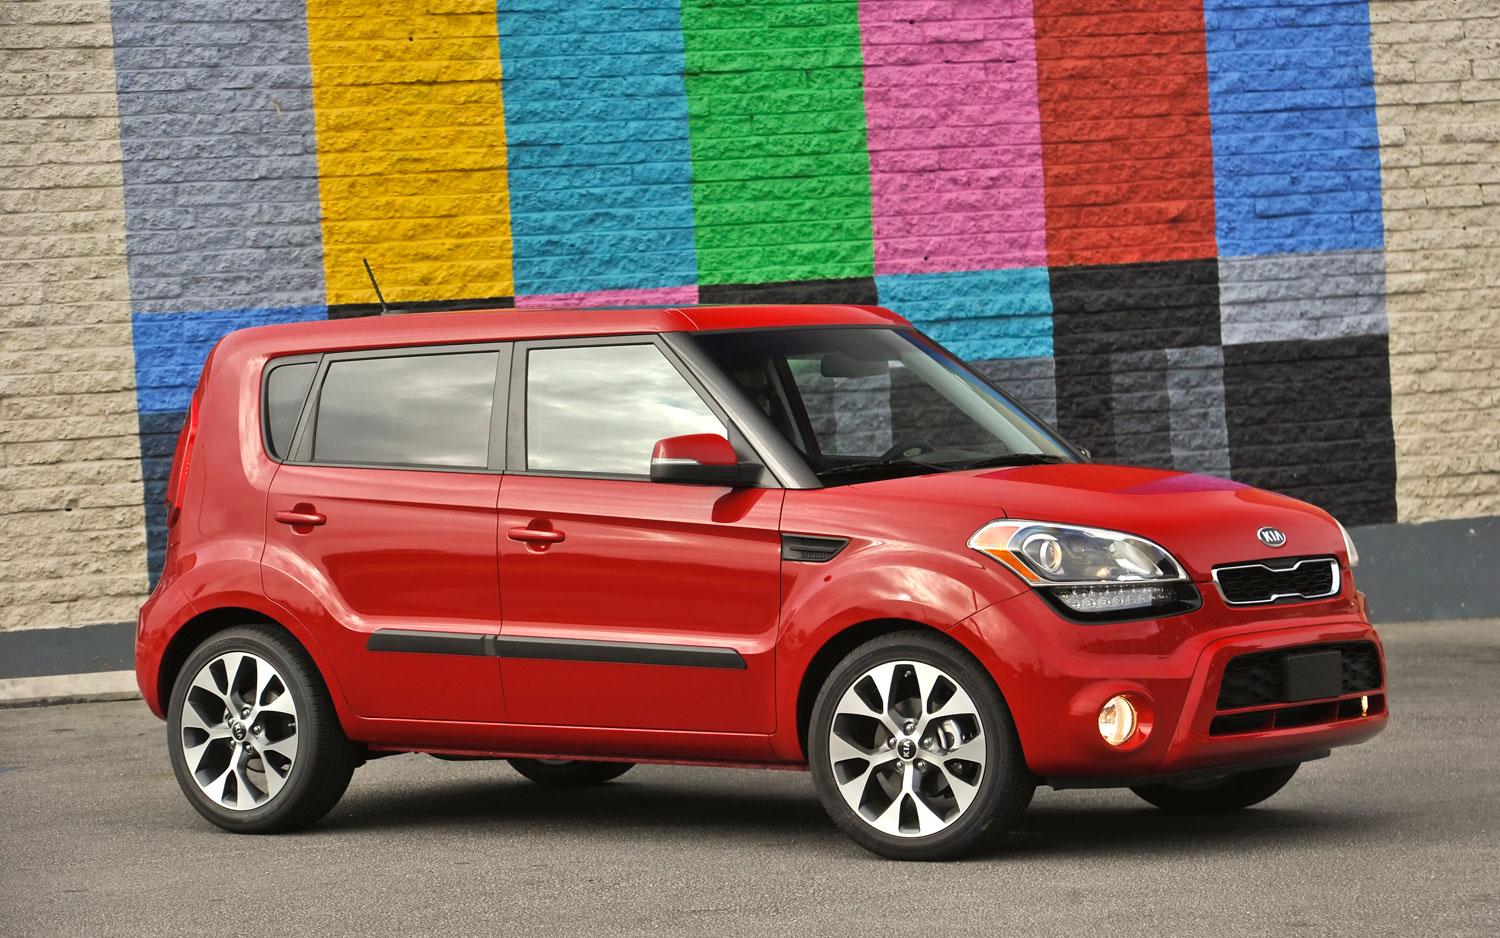 Going Electric: Kia Soul EV Slated for U.S. in Could Debut